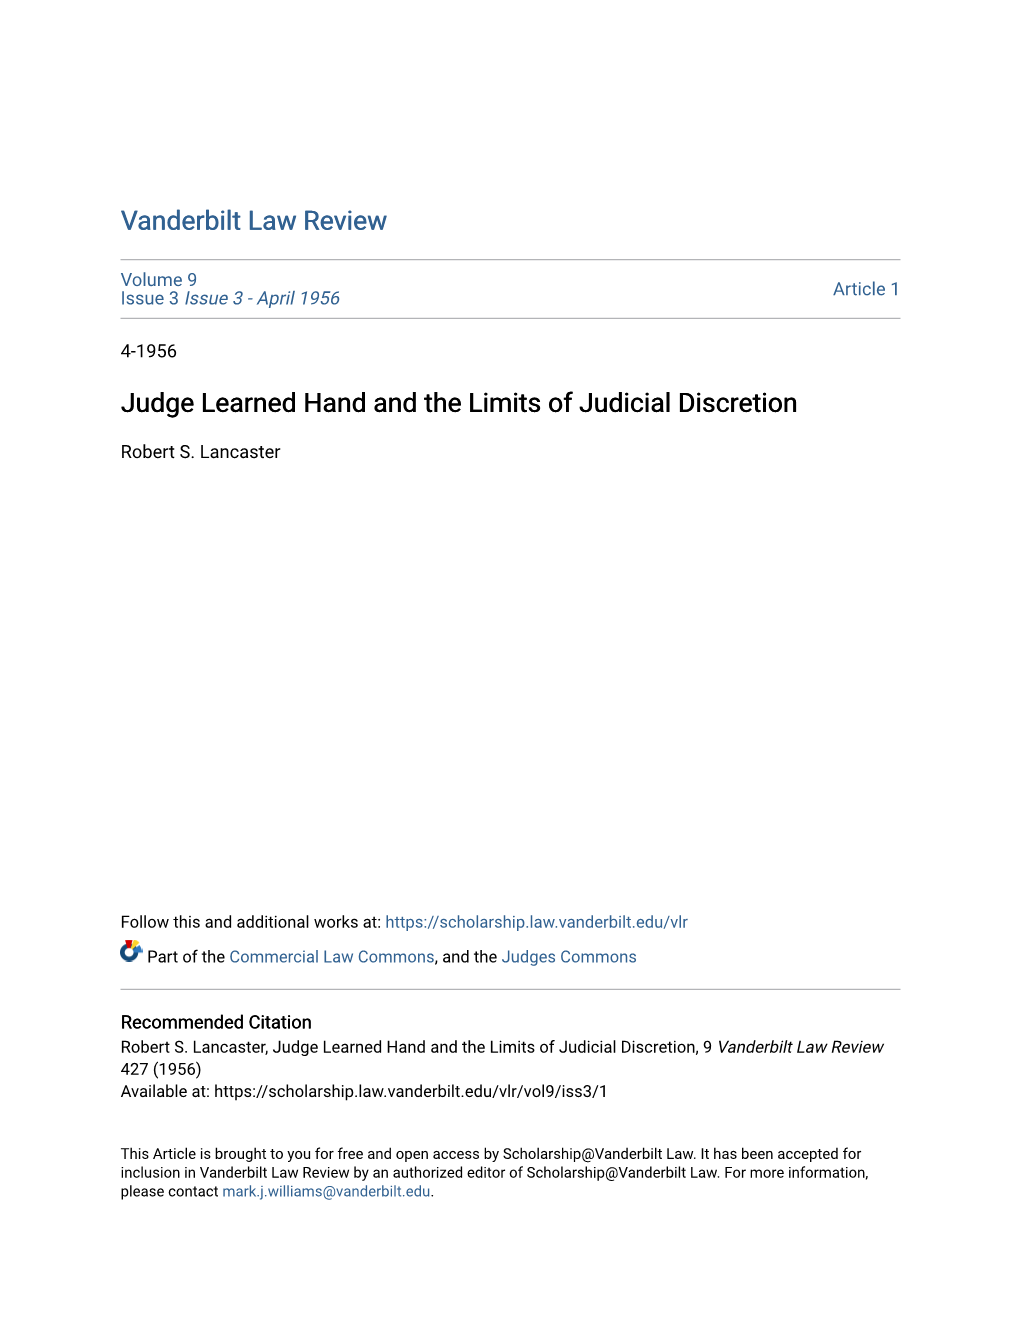 Judge Learned Hand and the Limits of Judicial Discretion